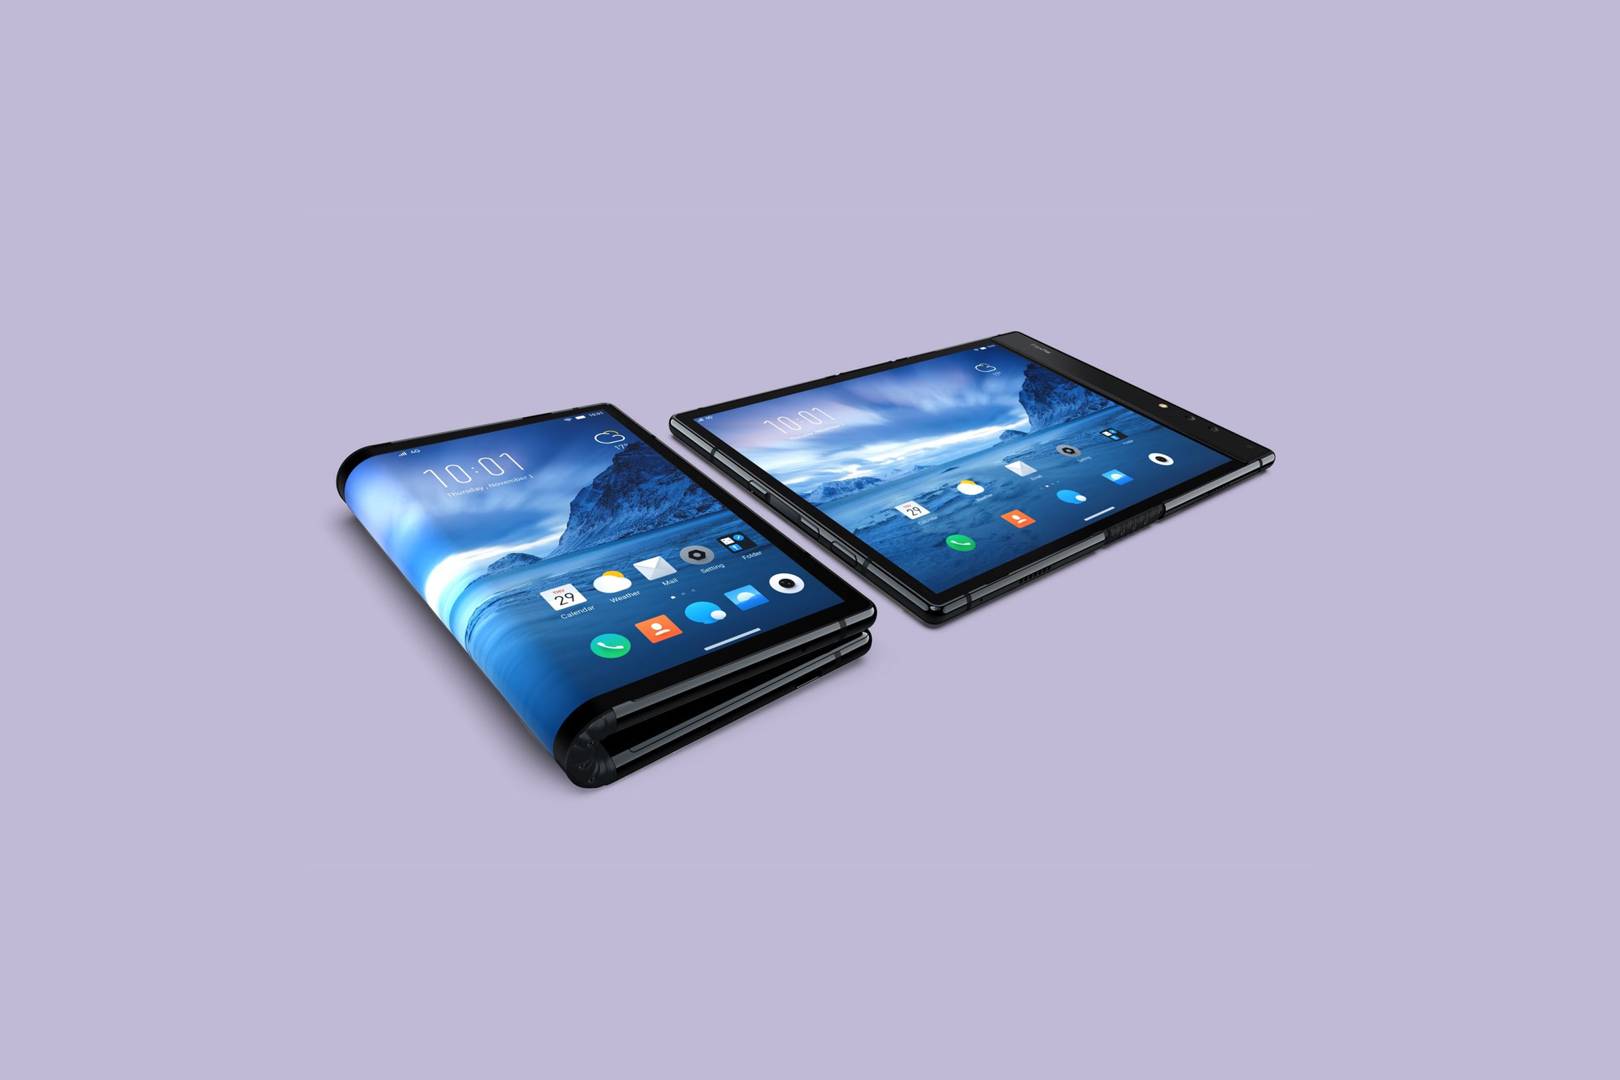 Folding phones are finally here. So what's the point in them?